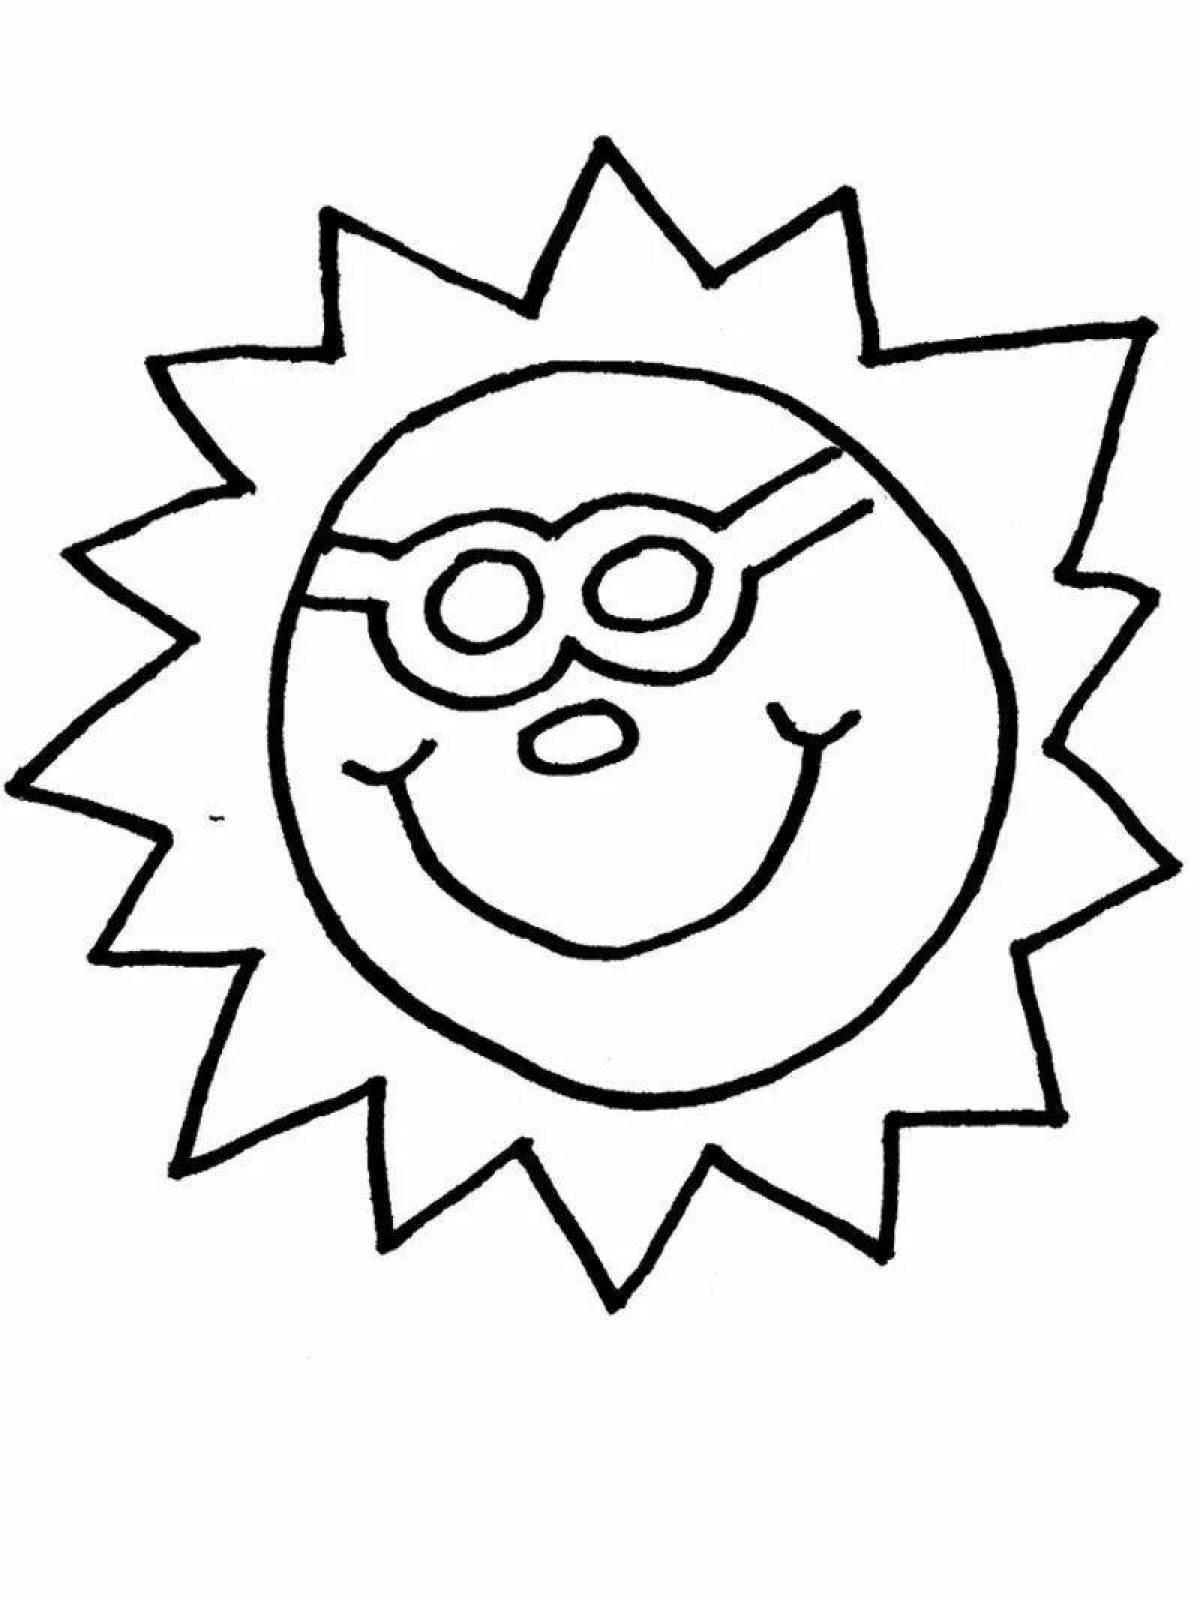 Playful sun coloring page